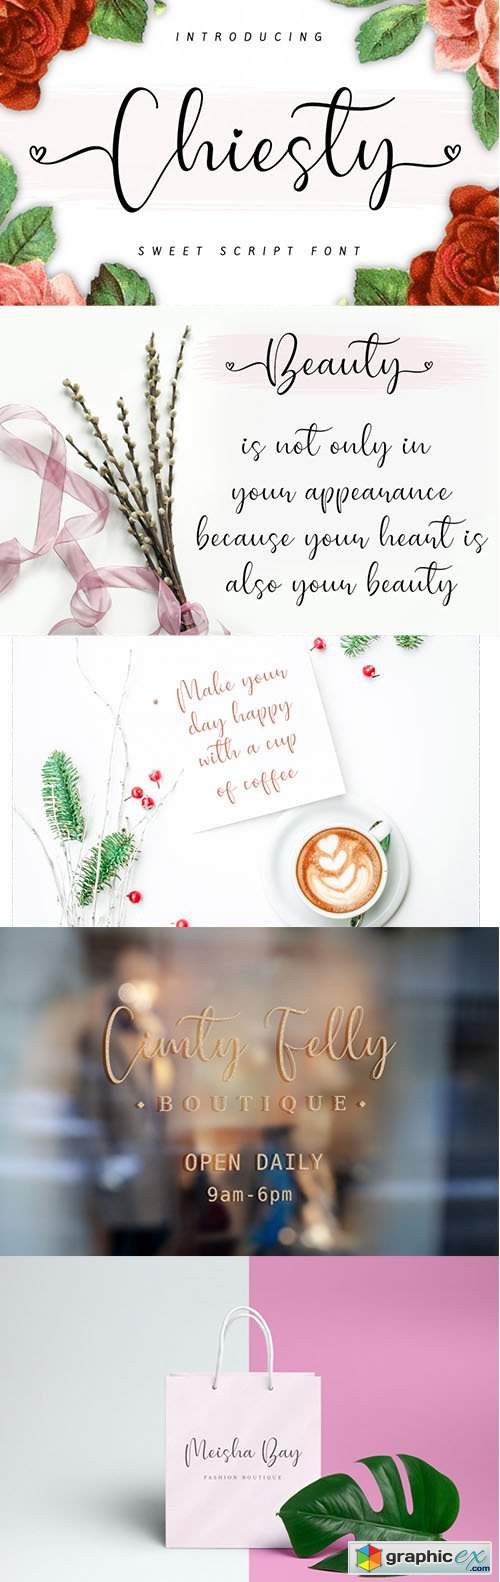 Chiesty Script Font Free Download Vector Stock Image Photoshop Icon